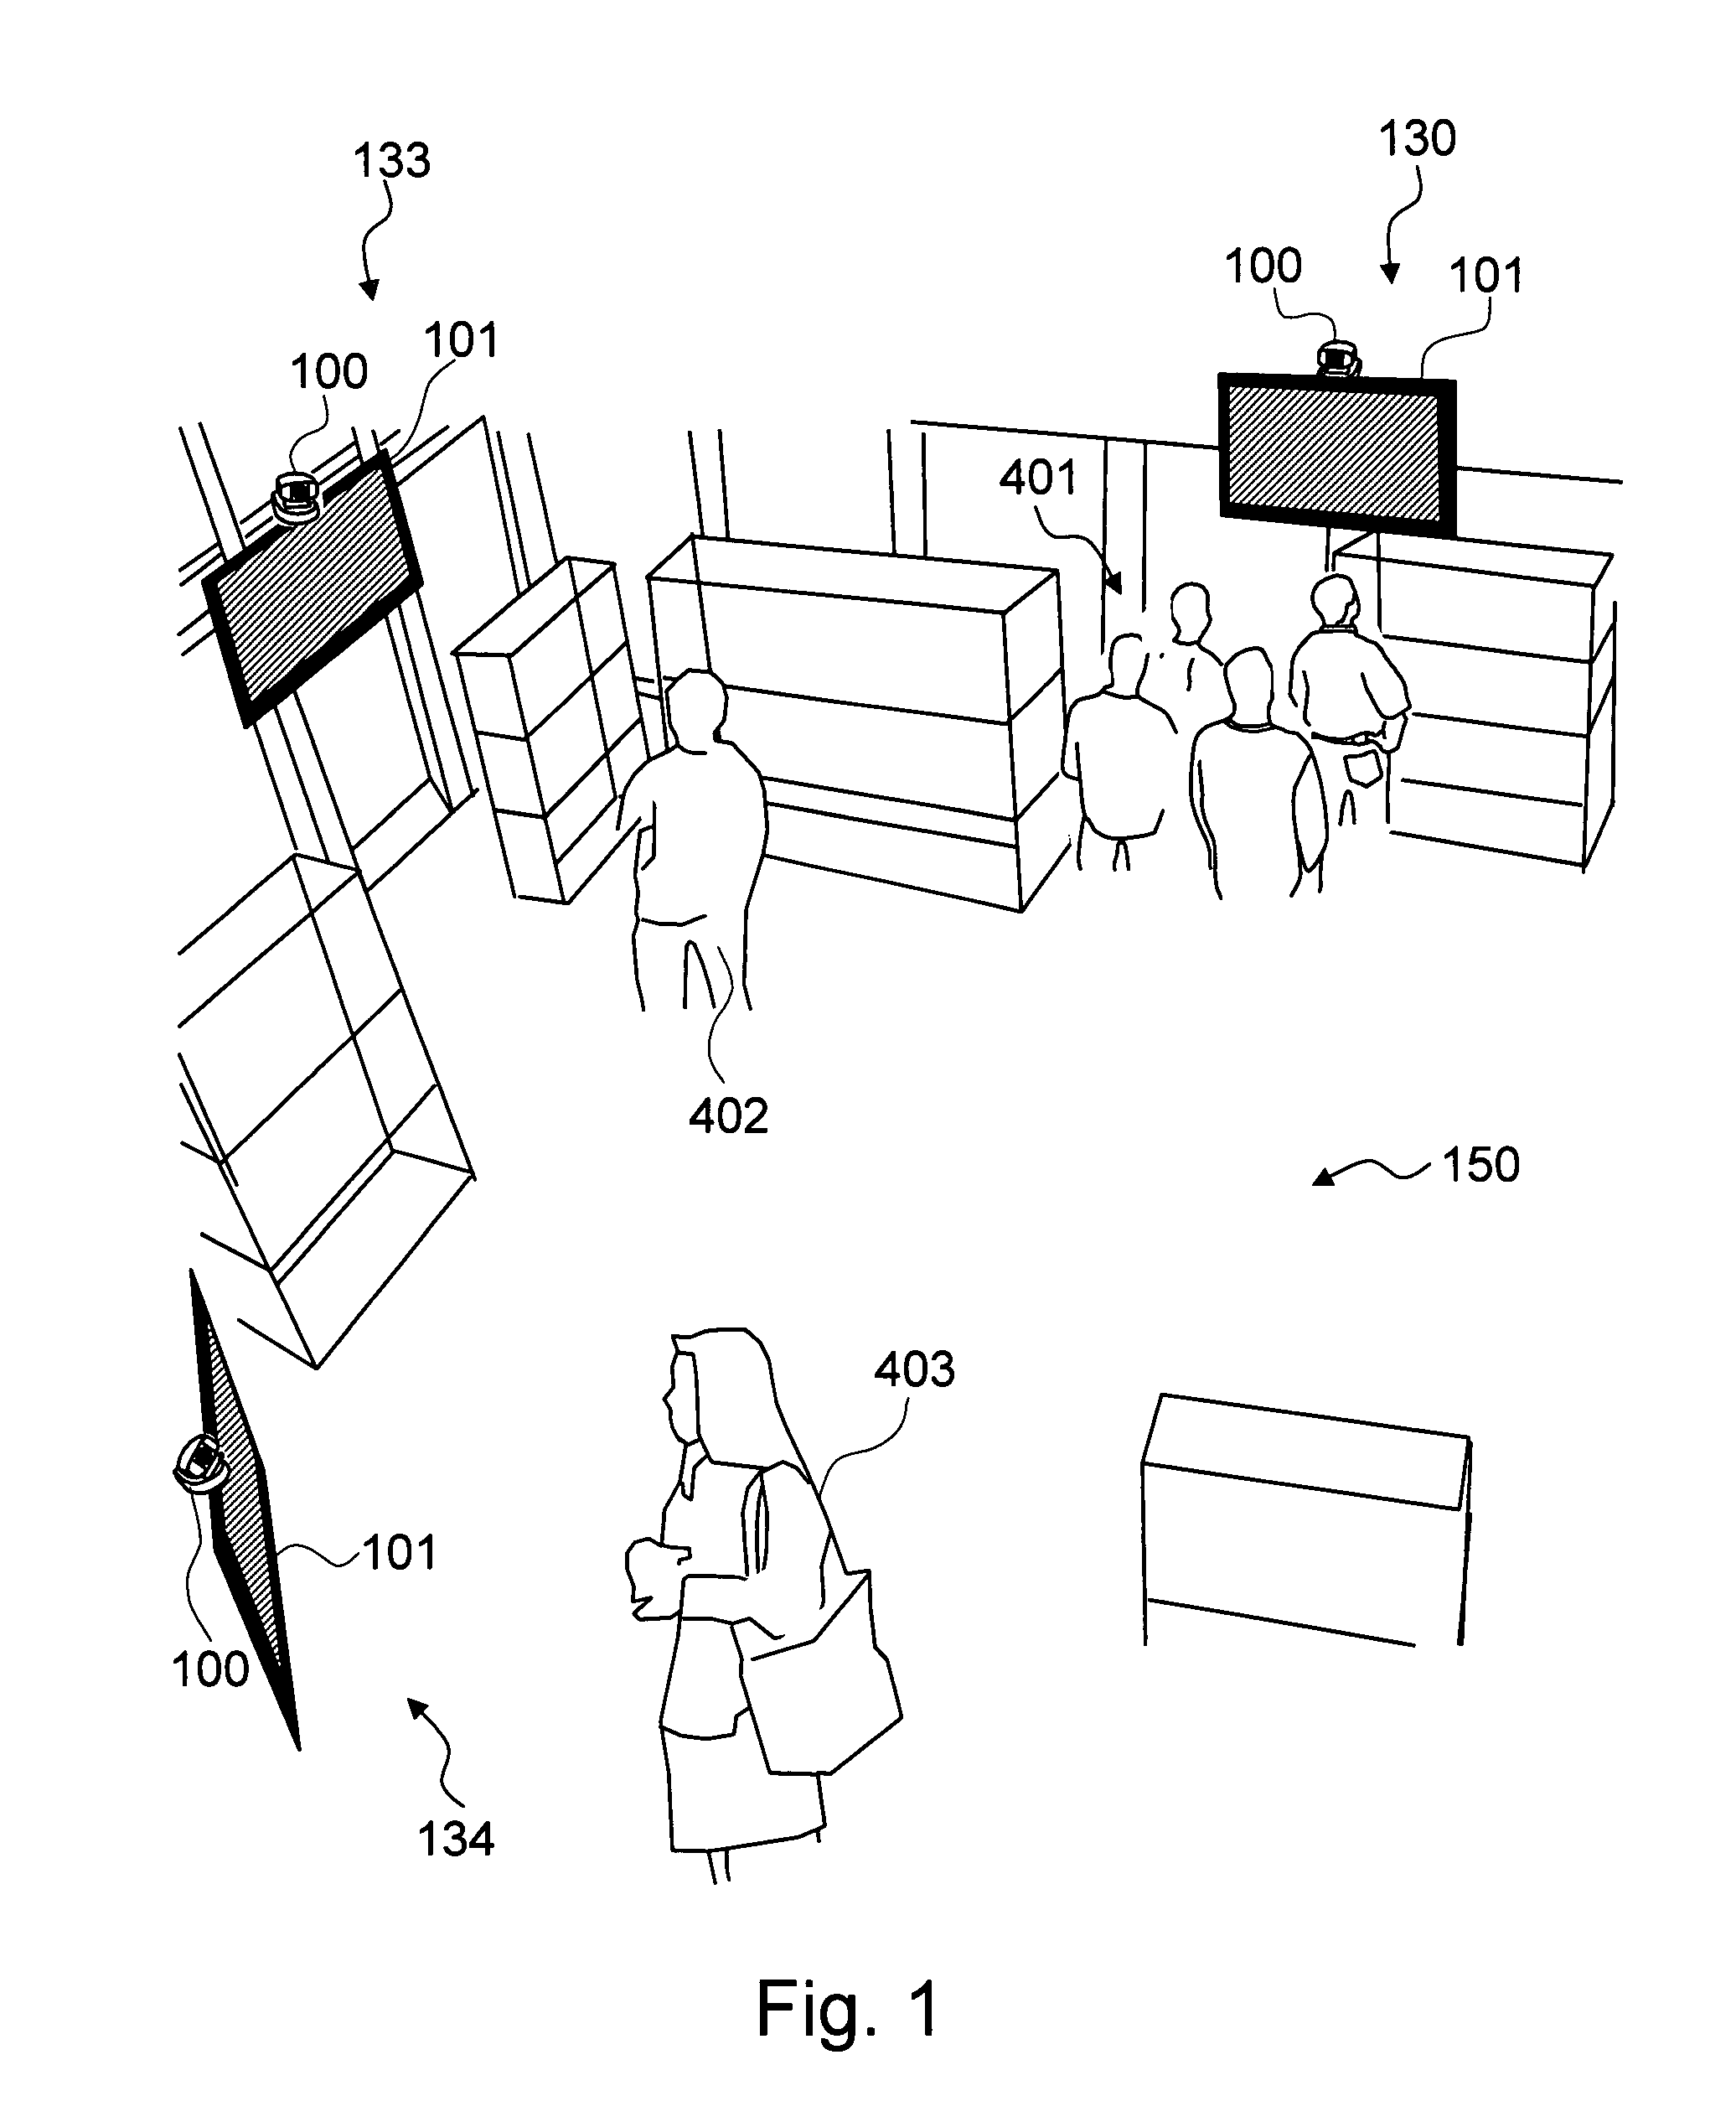 Method and system for automatically measuring and forecasting the demographic characterization of customers to help customize programming contents in a media network